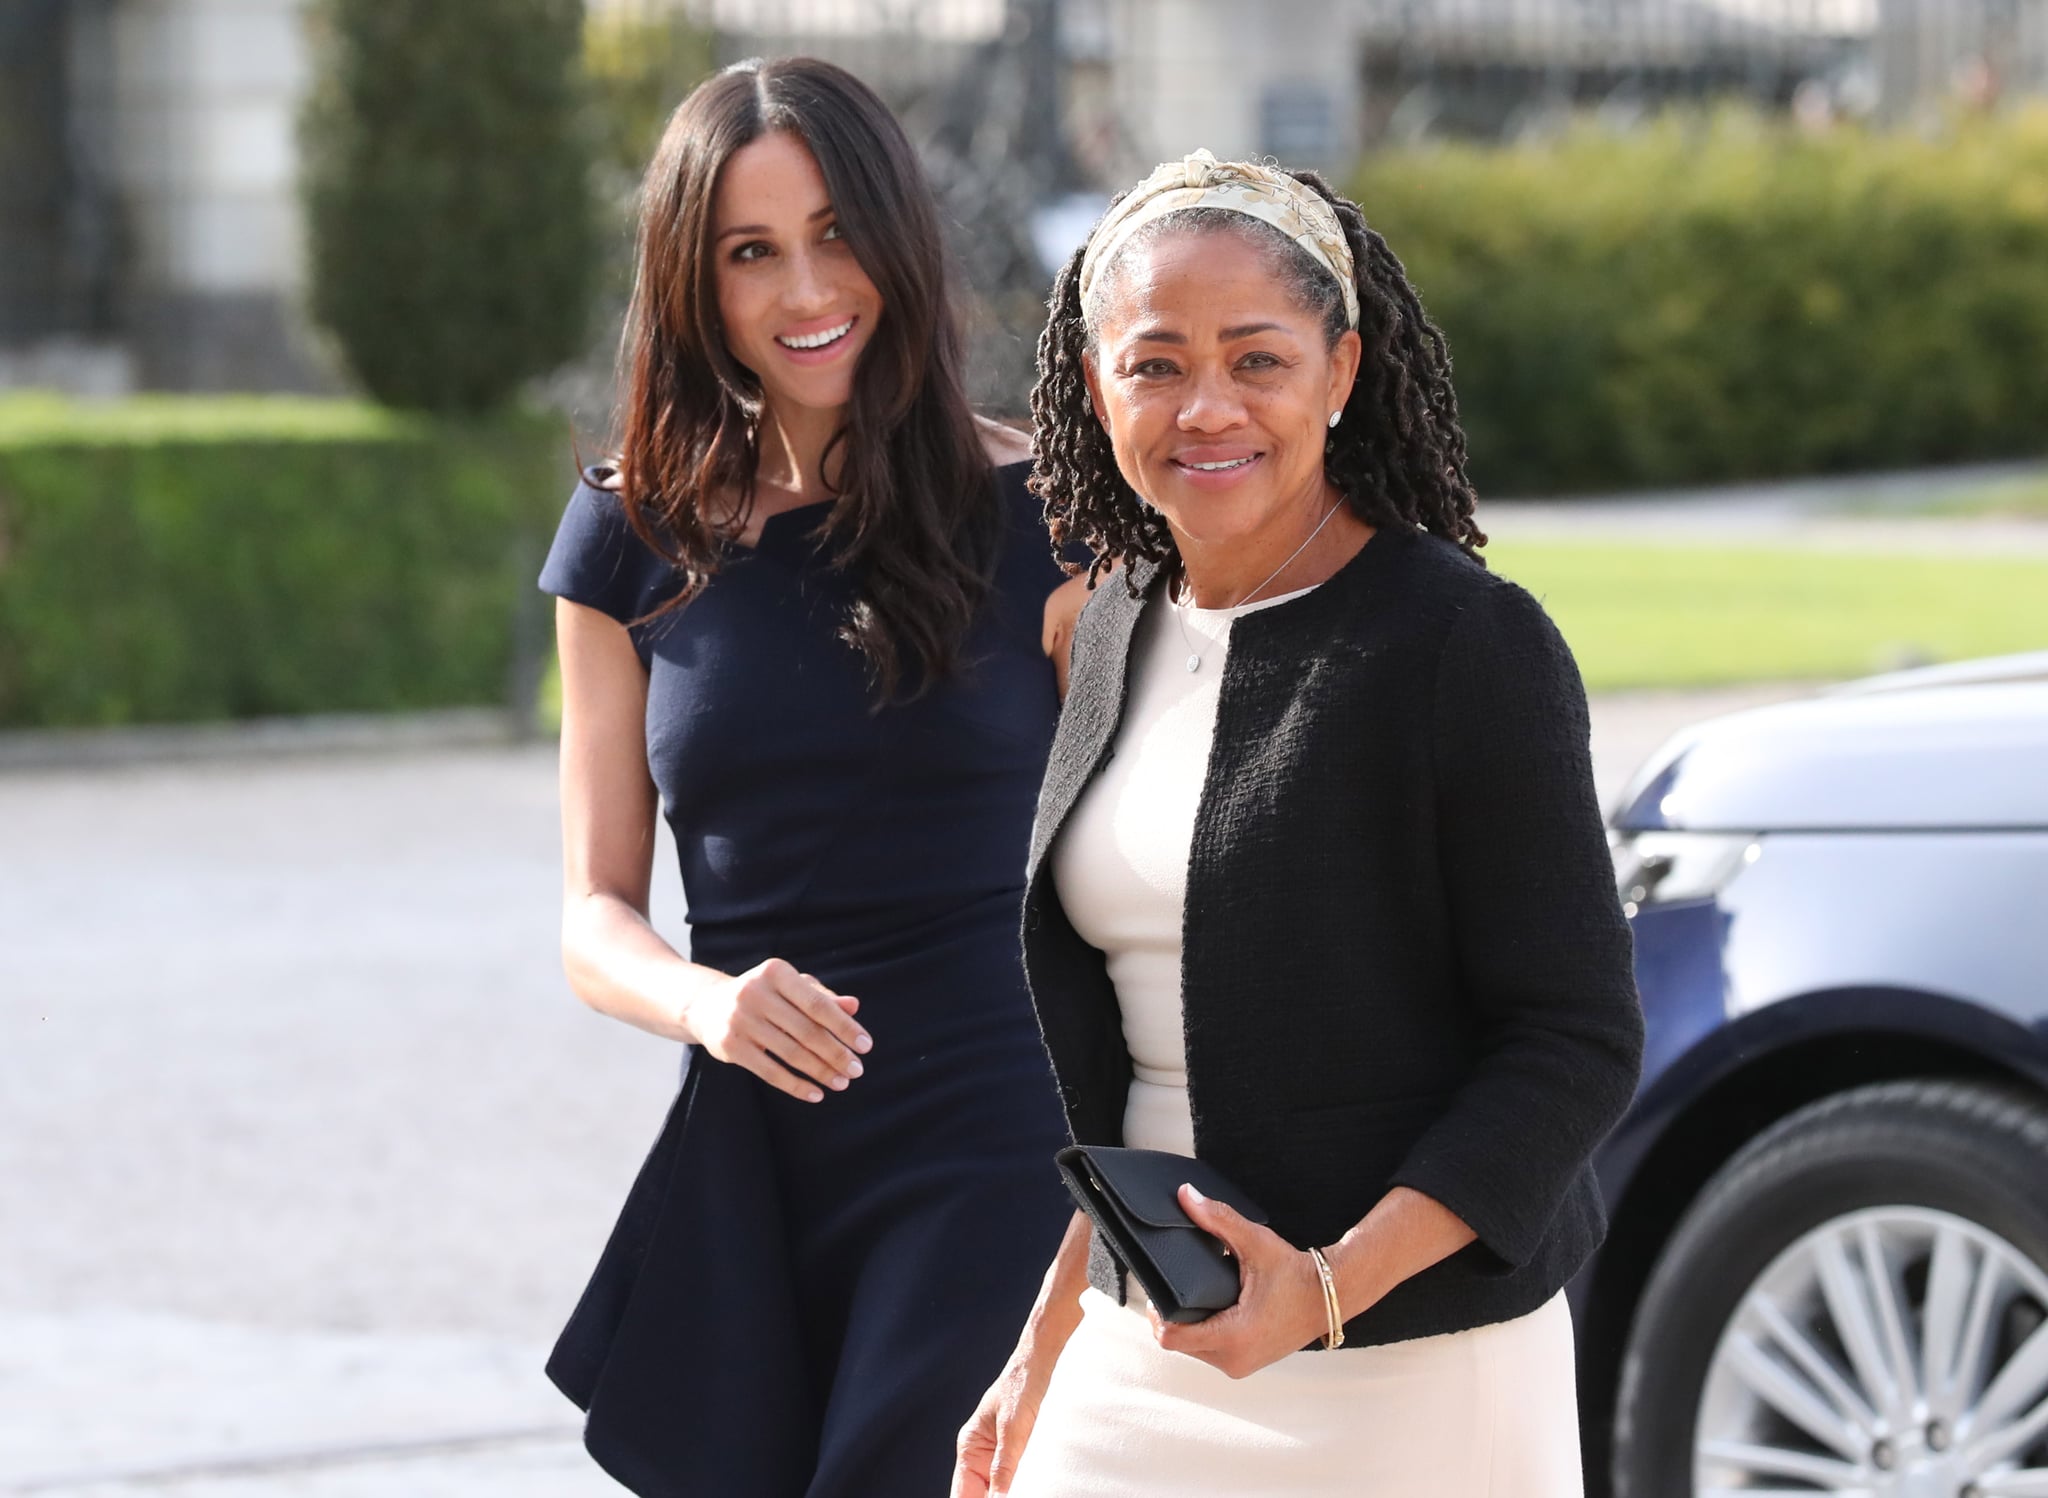 BERKSHIRE, ENGLAND - MAY 18:  Meghan Markle and her mother, Doria Ragland arrive at Cliveden House Hotel on the National Trust's Cliveden Estate to spend the night before her wedding to Prince Harry on May 18, 2018 in Berkshire, England.  (Photo by Steve Parsons - Pool / Getty Images)